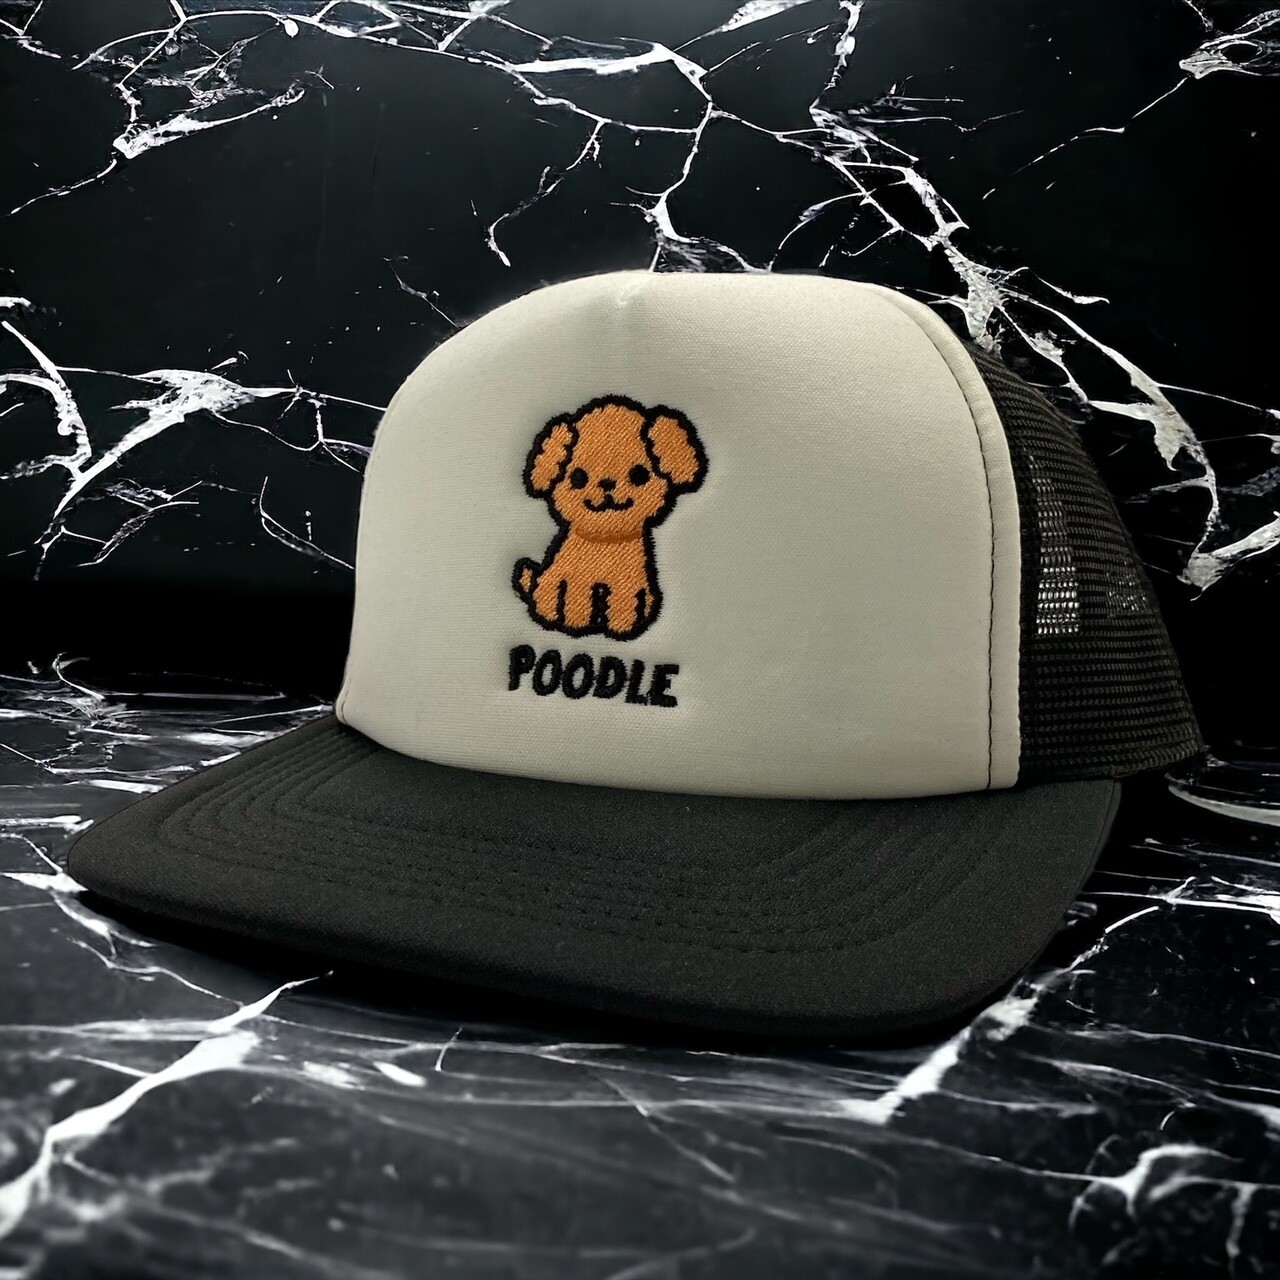 Poodle Embroidery Mesh Trucker Cap, Color: Black/White, Size: F (One Size)